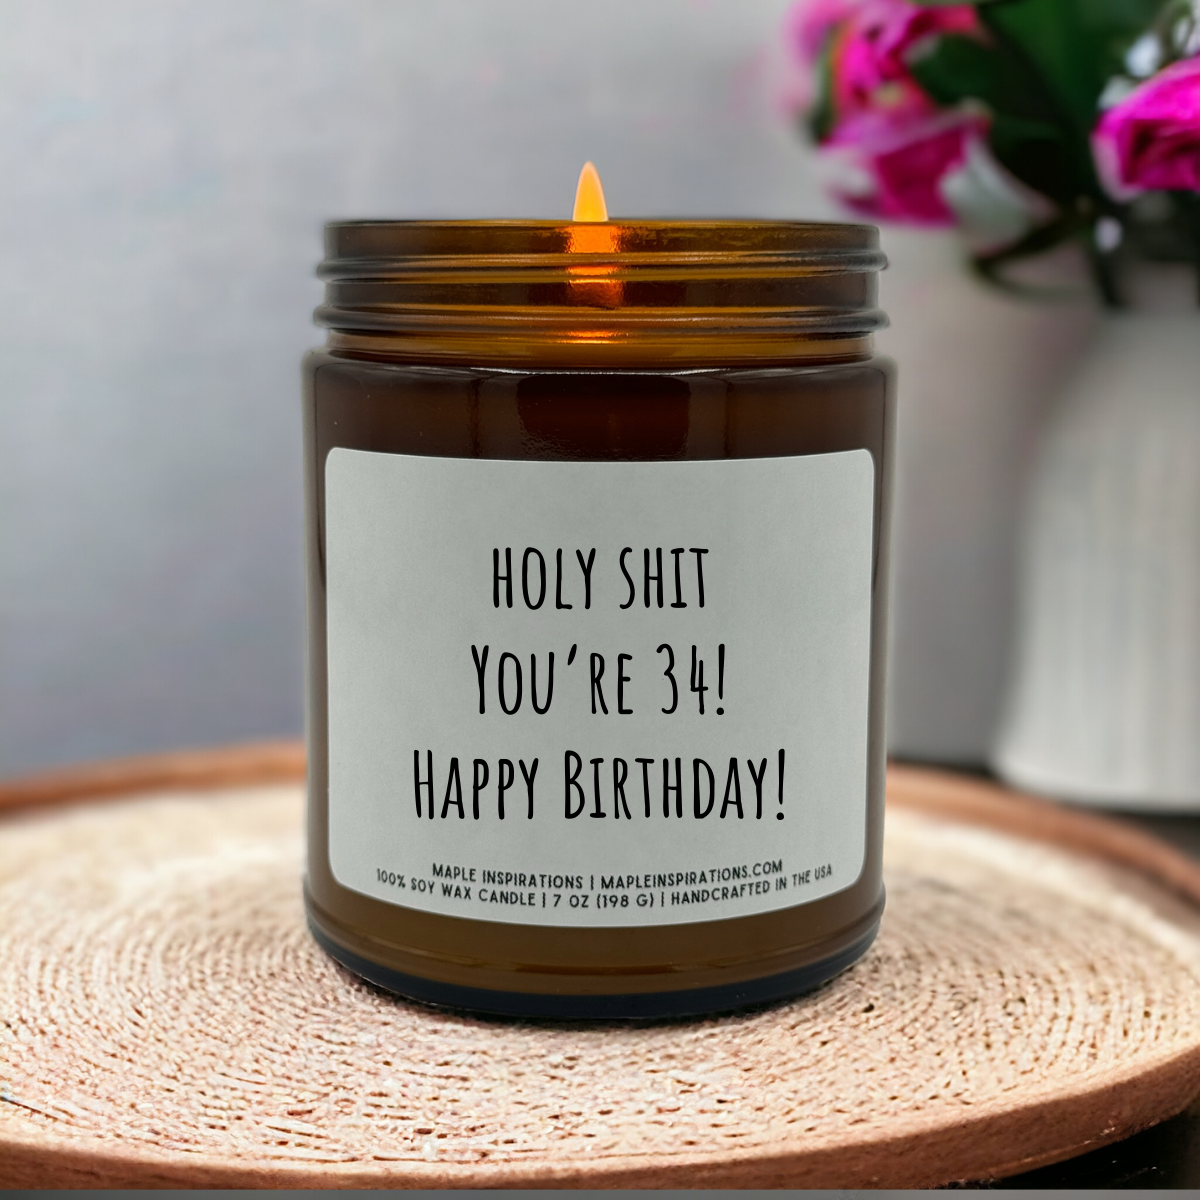 34th Birthday Gift, Funny Candle, Funny 34th Birthday Gift, Gift For 34th Birthday Turning 34 Years Old, Holy Shit You're 34